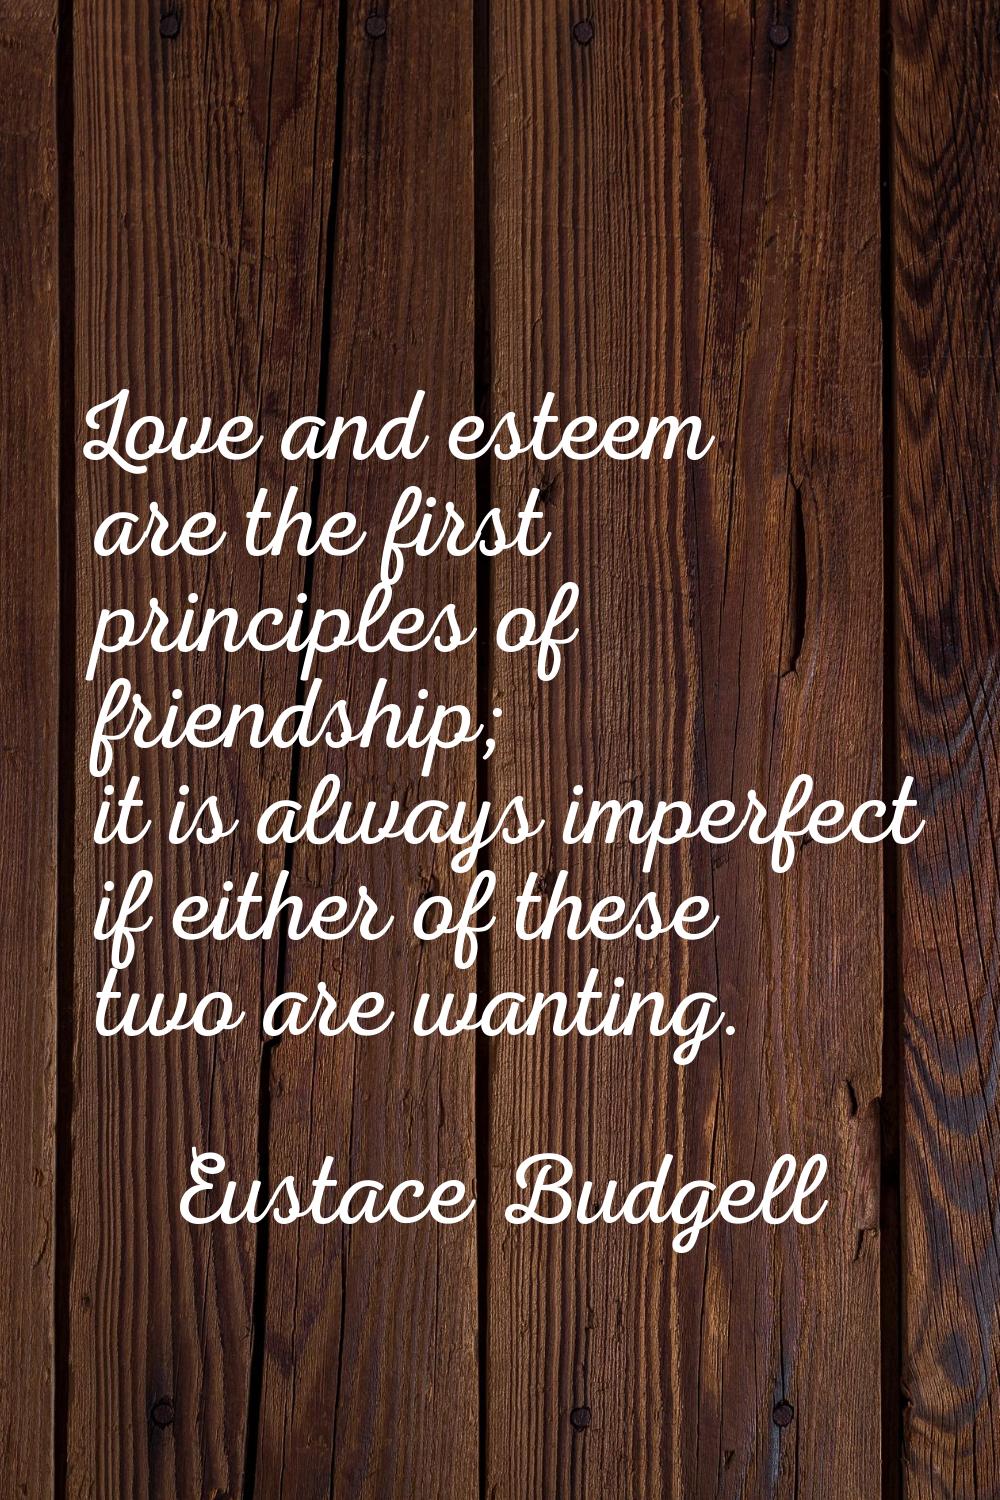 Love and esteem are the first principles of friendship; it is always imperfect if either of these t